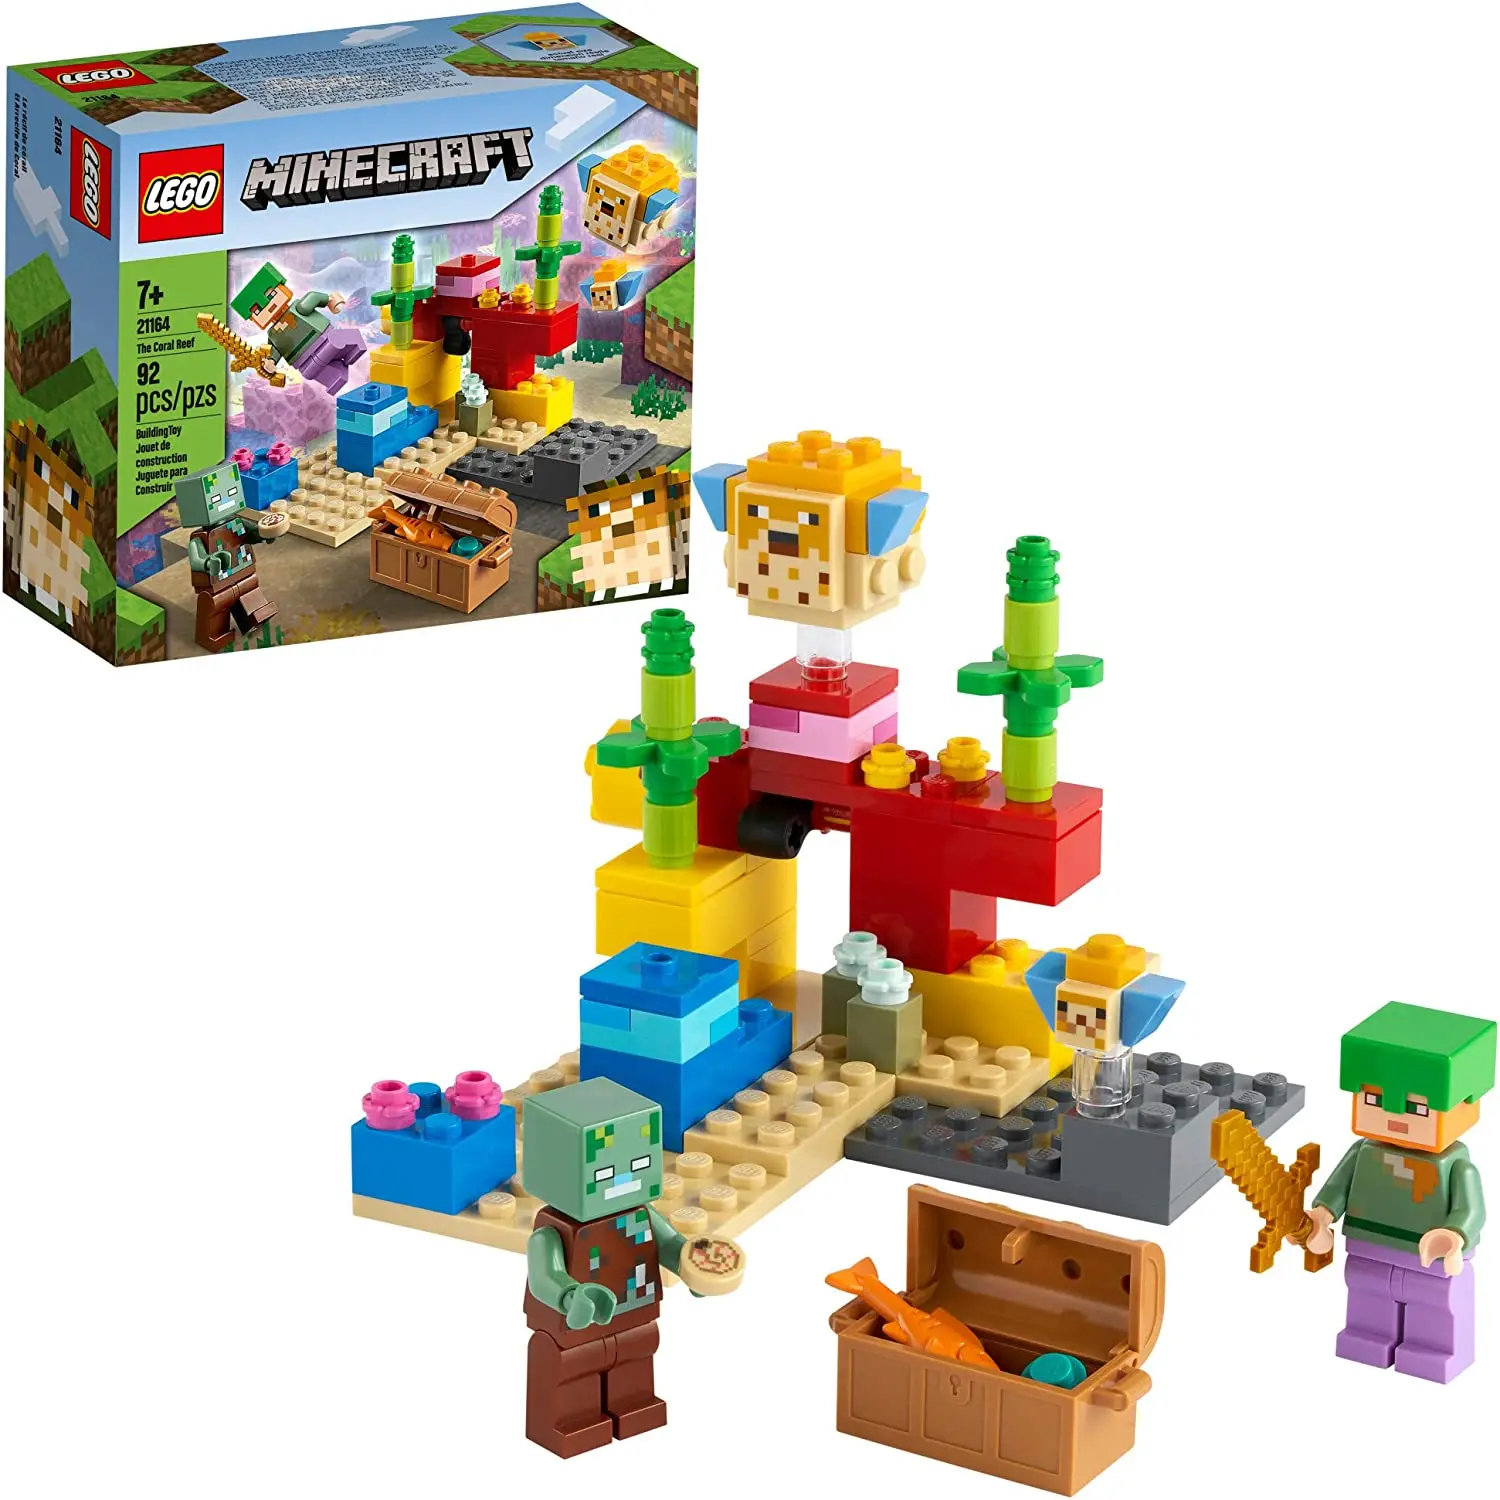 LEGO Minecraft The Coral Reef 21164 Hands-on Minecraft Marine Toy Featuring Alex, a Drowned and 2 Cool Puffer Fish, 92 Pcs